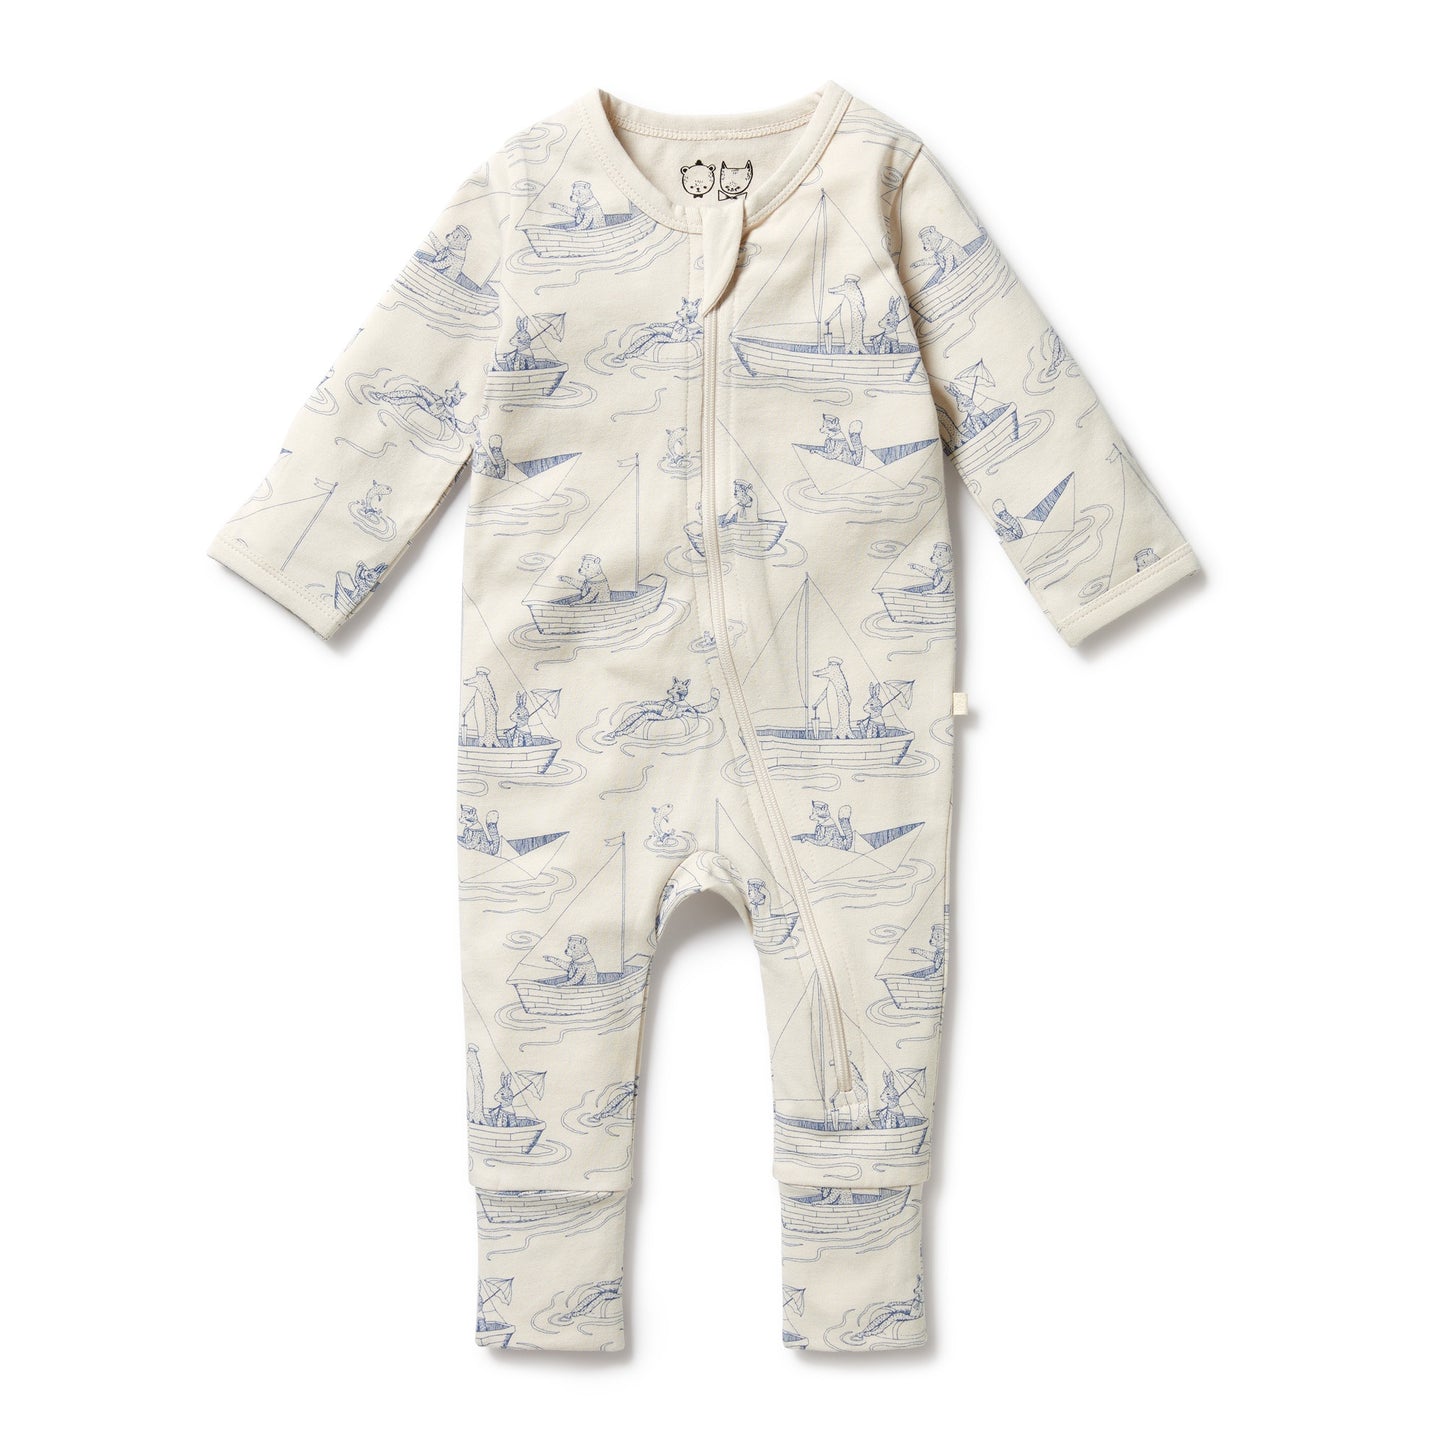 ORGANIC ZIPSUIT WITH FEET - SAIL AWAY